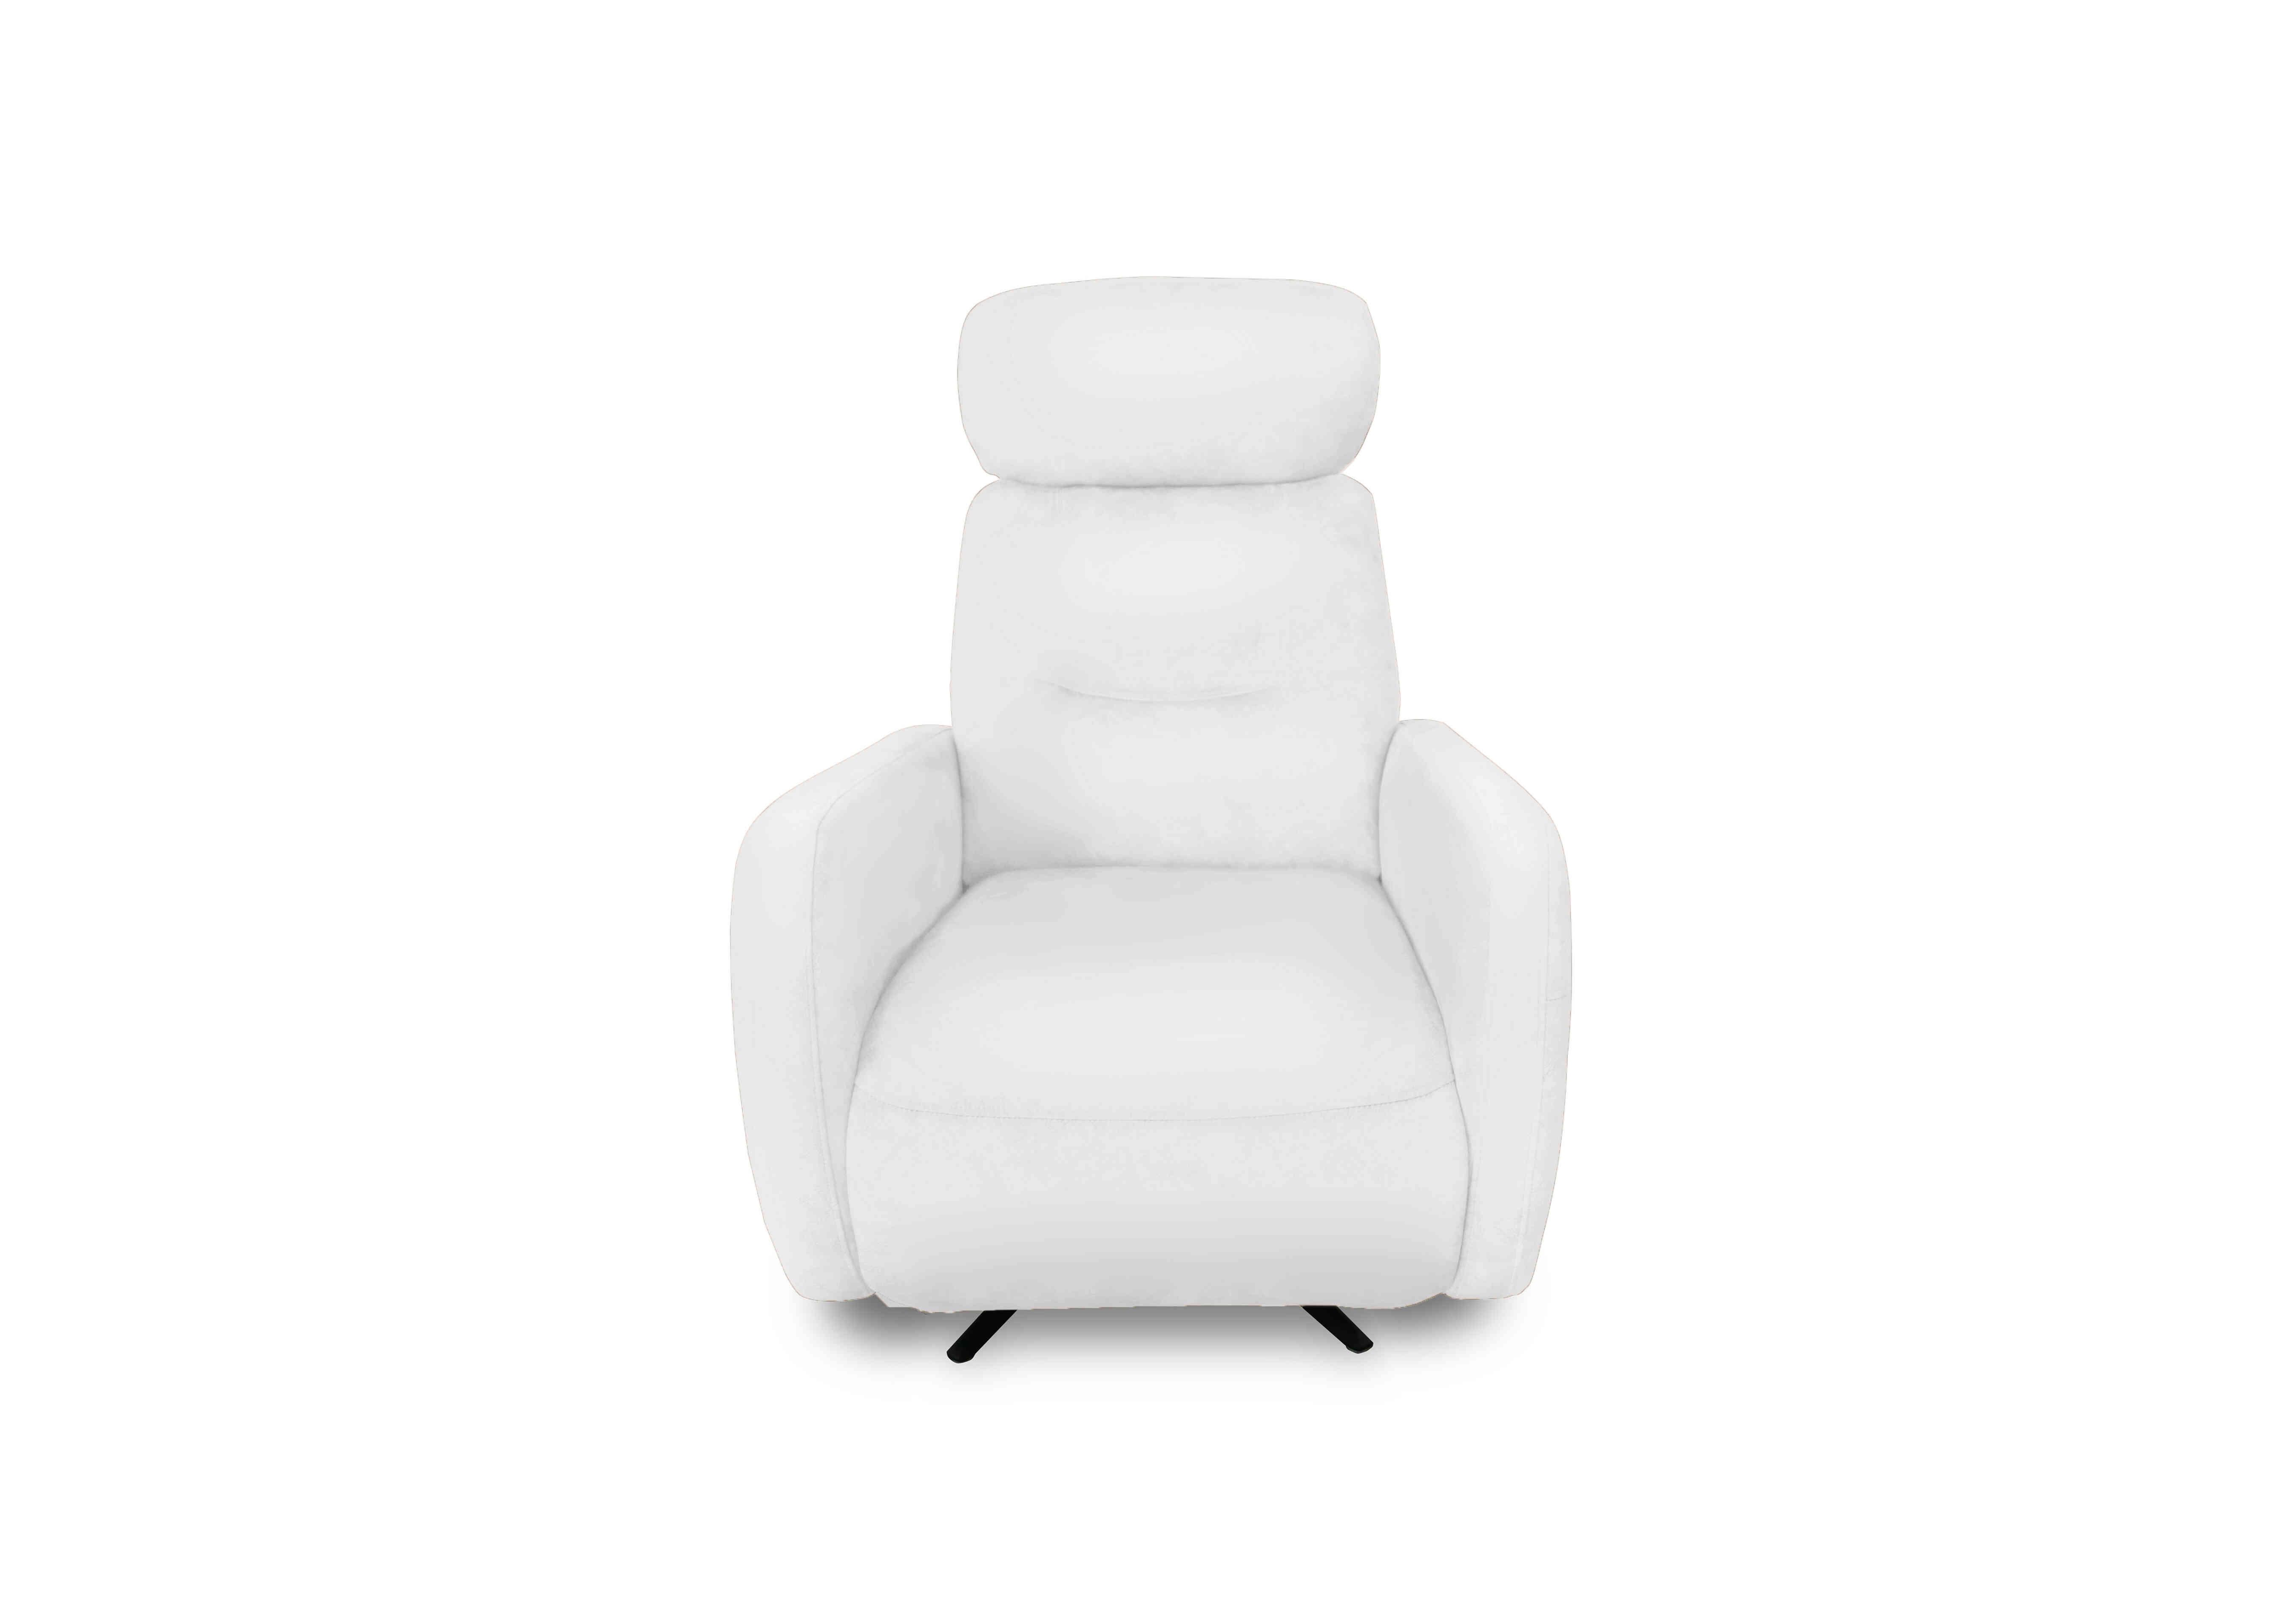 Designer Chair Collection Tokyo Leather Manual Recliner Swivel Chair in Bv-744d Star White on Furniture Village